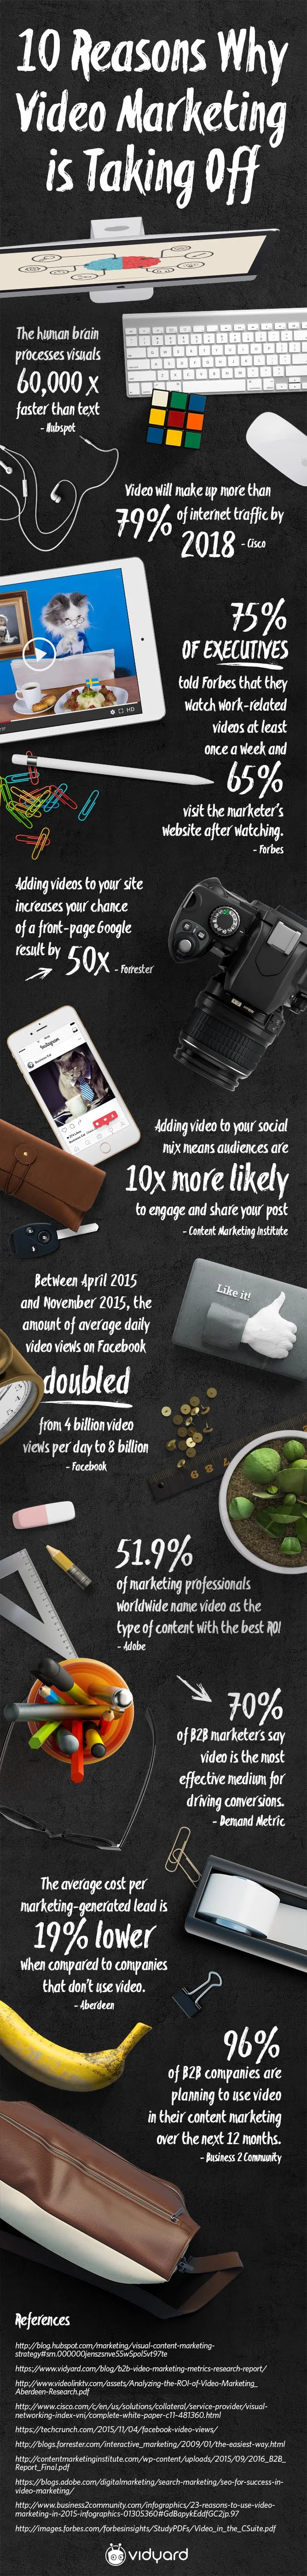 10 Amazing Facts That Will Turn You Into A Video Marketing Advocate - #Infographic